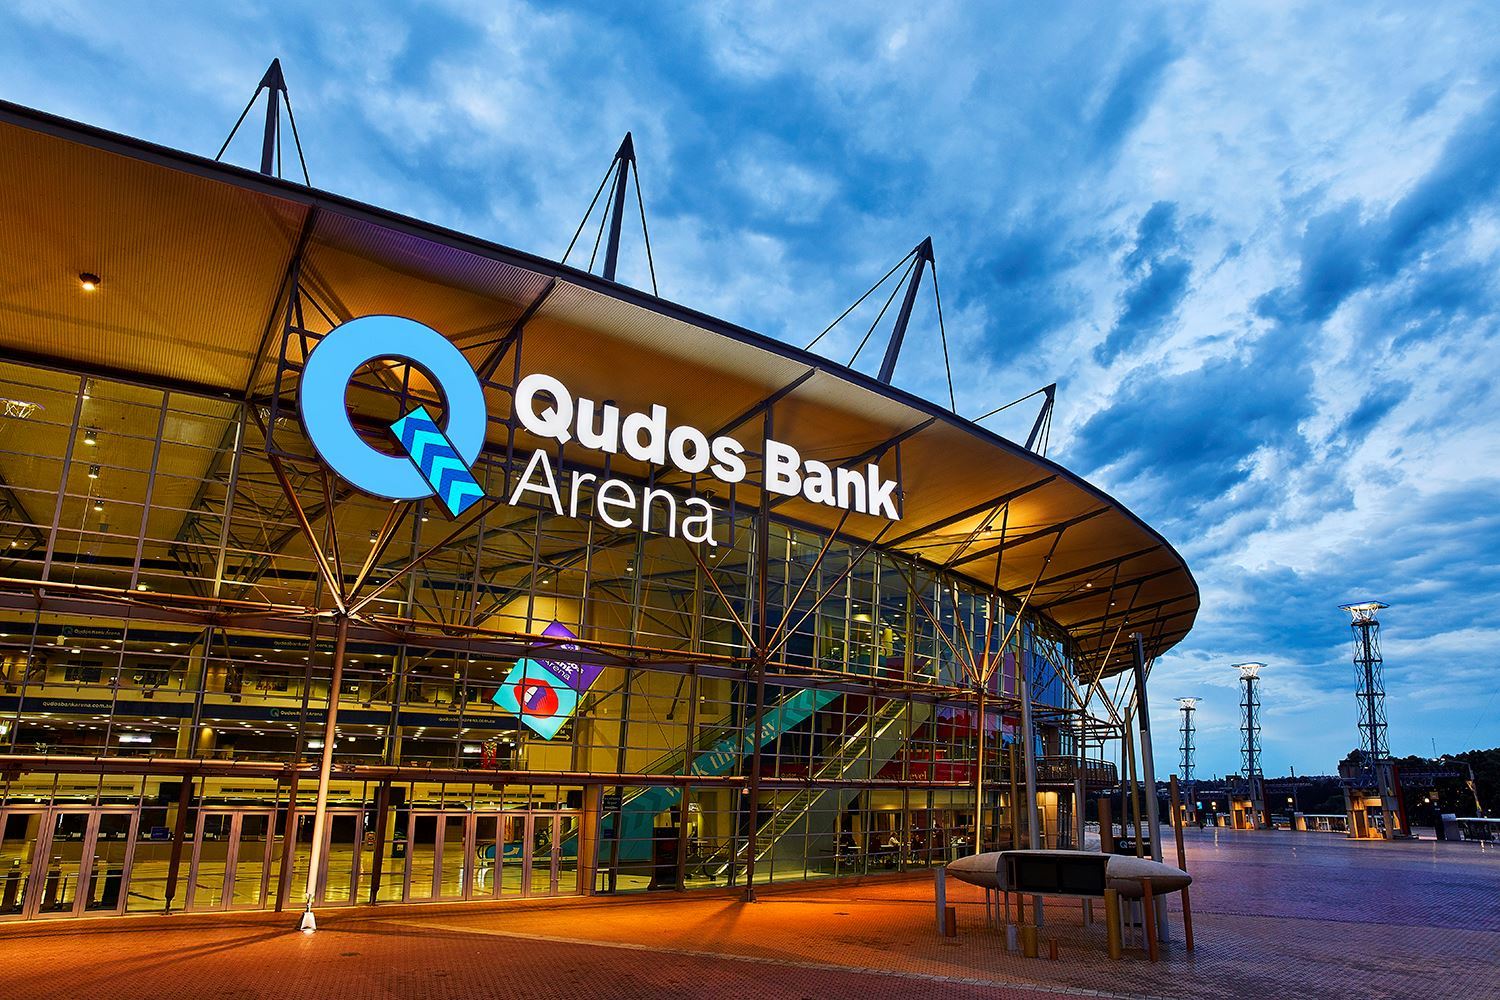 Arrive to Qudos Bank Arena in Style with LuxVan